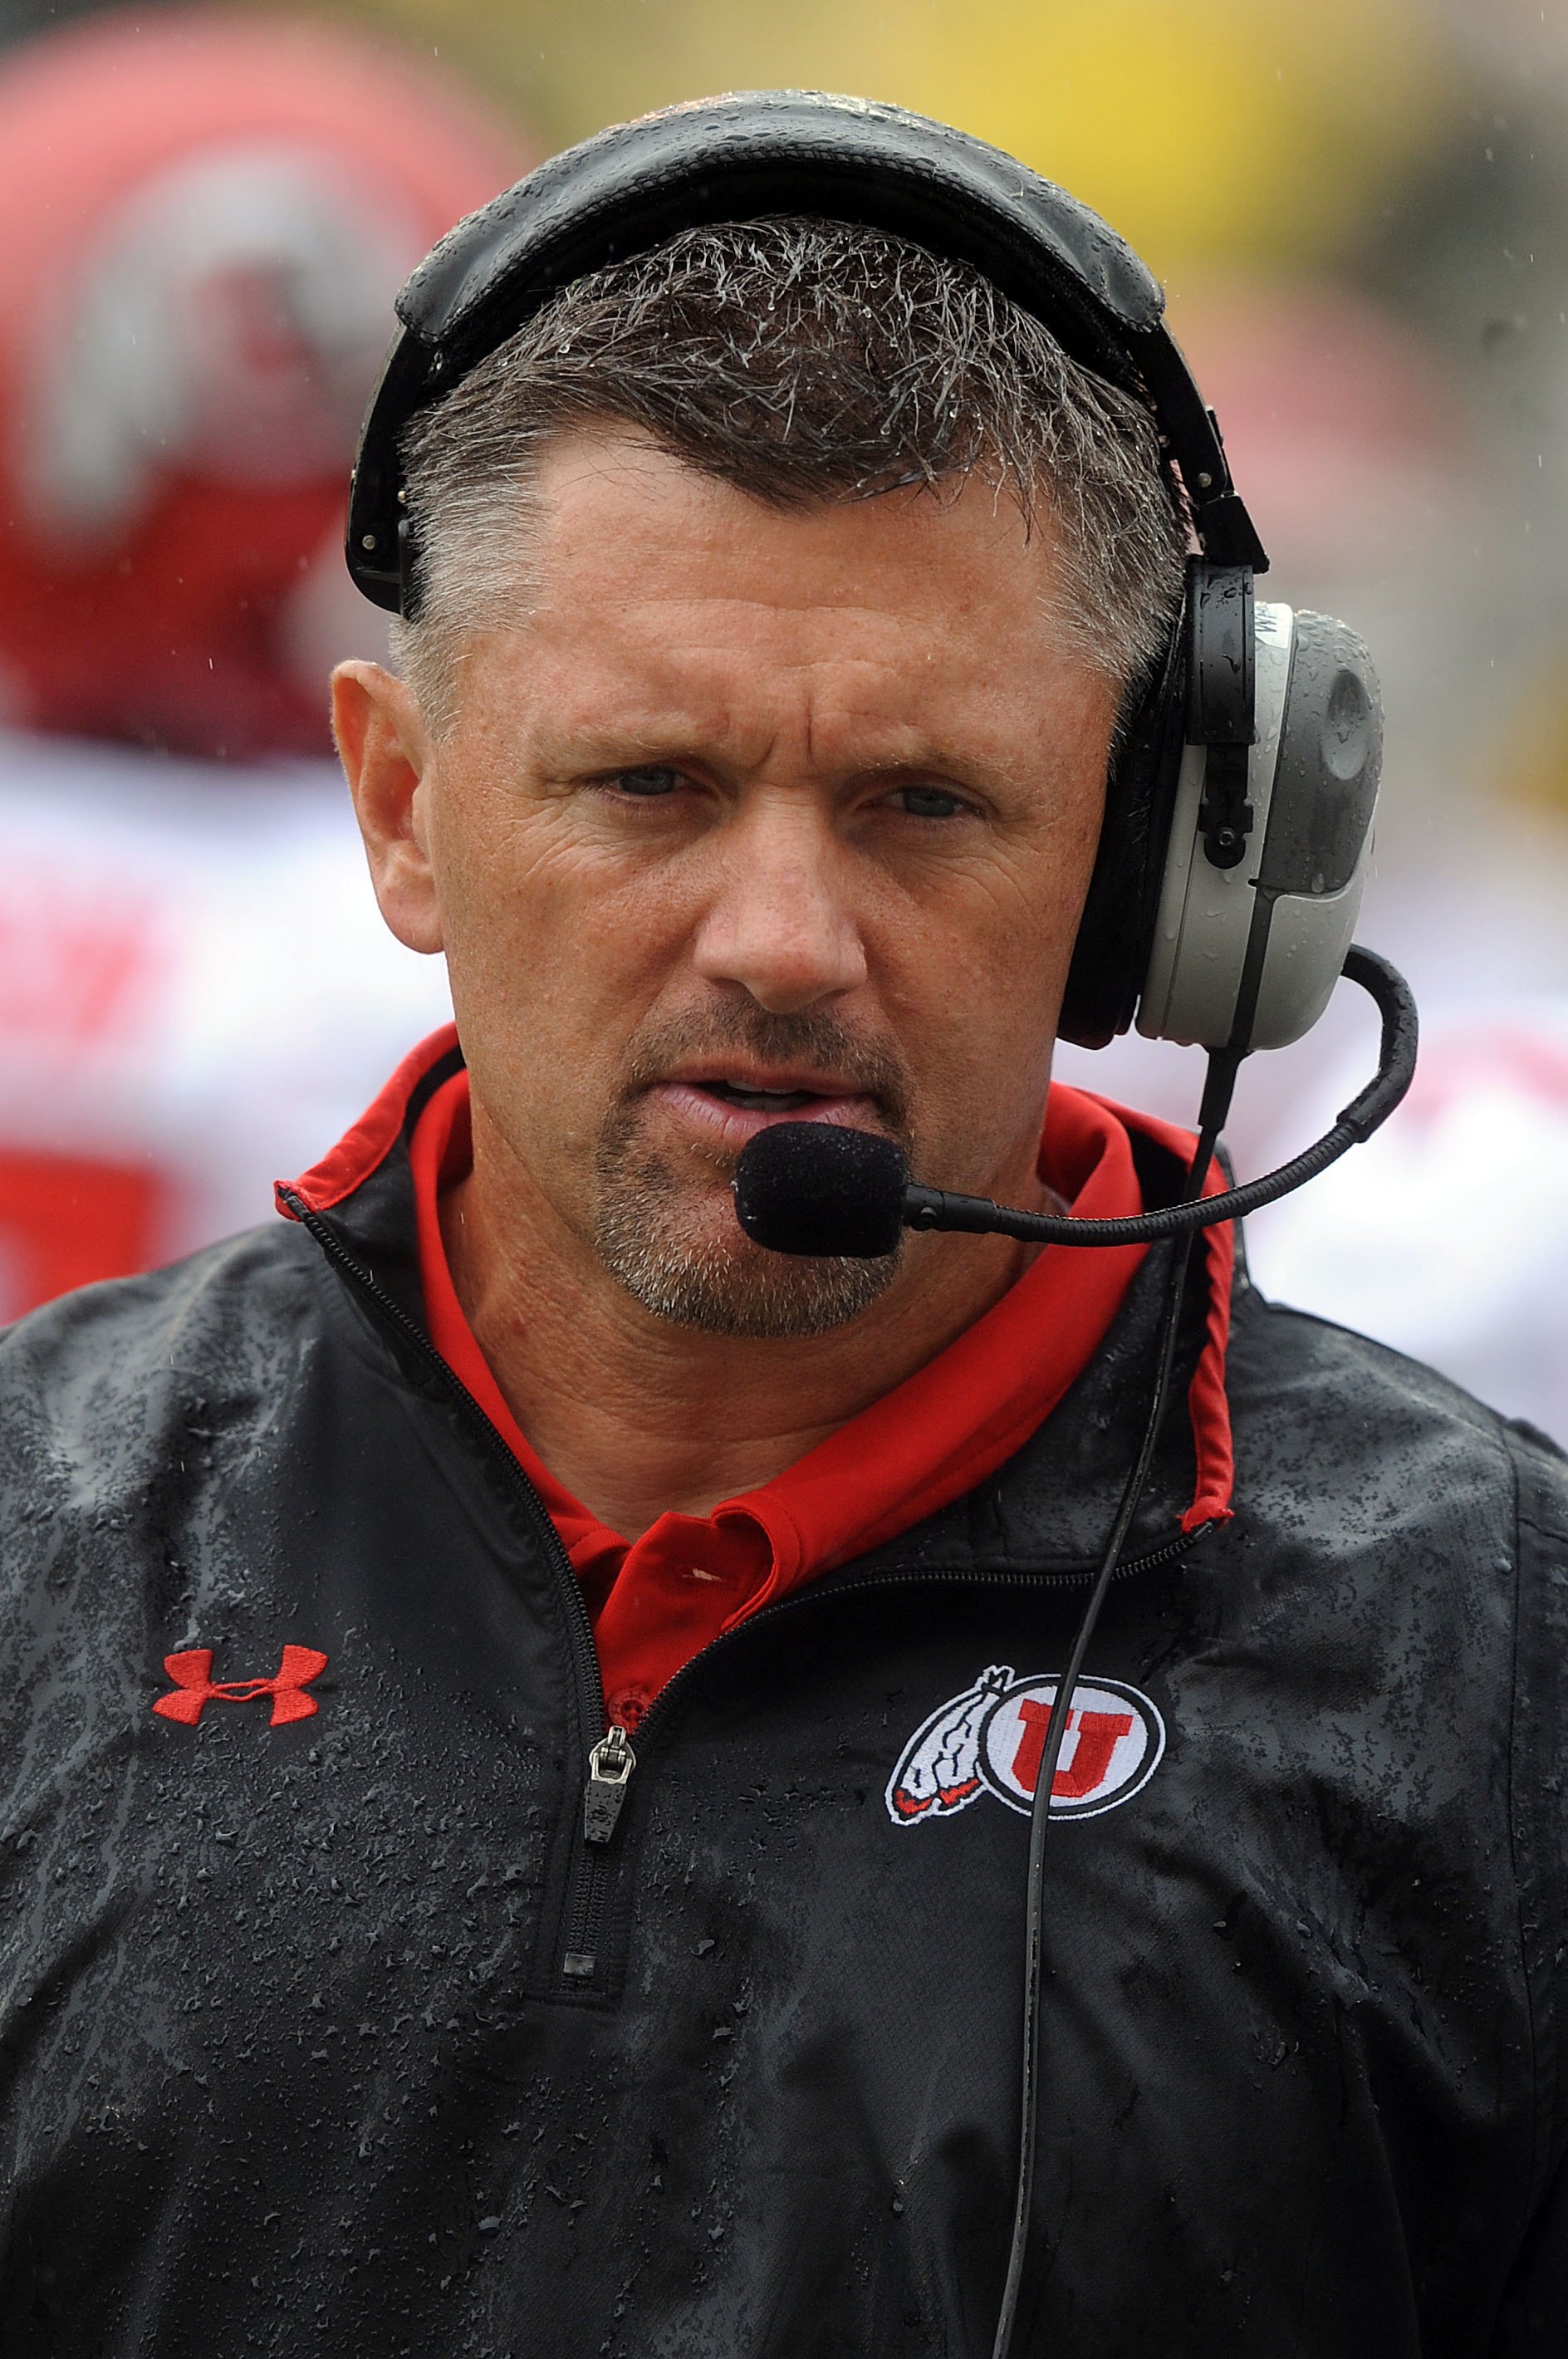 EUGENE, OR - SEPTEMBER 19:  Head coach Kyle Whittingham of the Utah Utes works the sidelines in the third quarter of the game against the Oregon Ducks at Autzen Stadium on September 19, 2009 in Eugene, Oregon. Oregon won the game 31-24. (Photo by Steve Dy